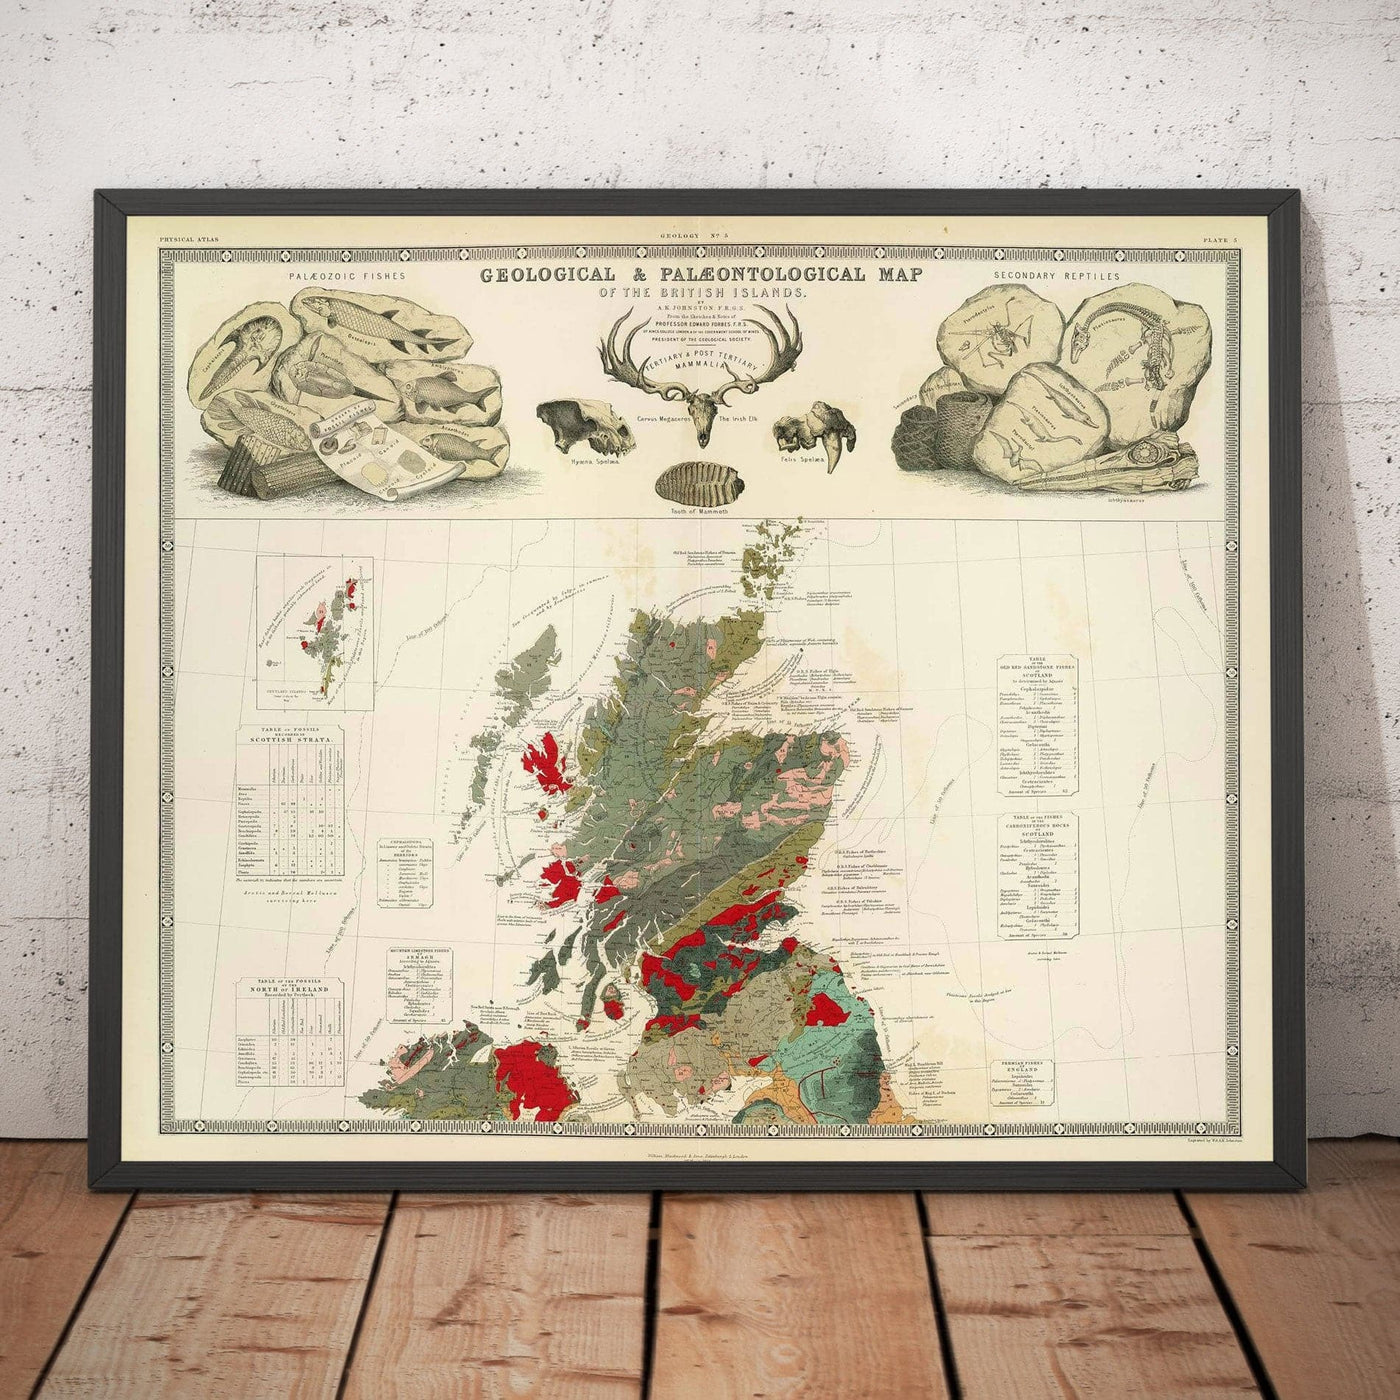 Old Geology & Palaeontology Map of Scotland, 1854, by A.K. Johnston and Edward Forbes - Rare Fossil Wall Chart